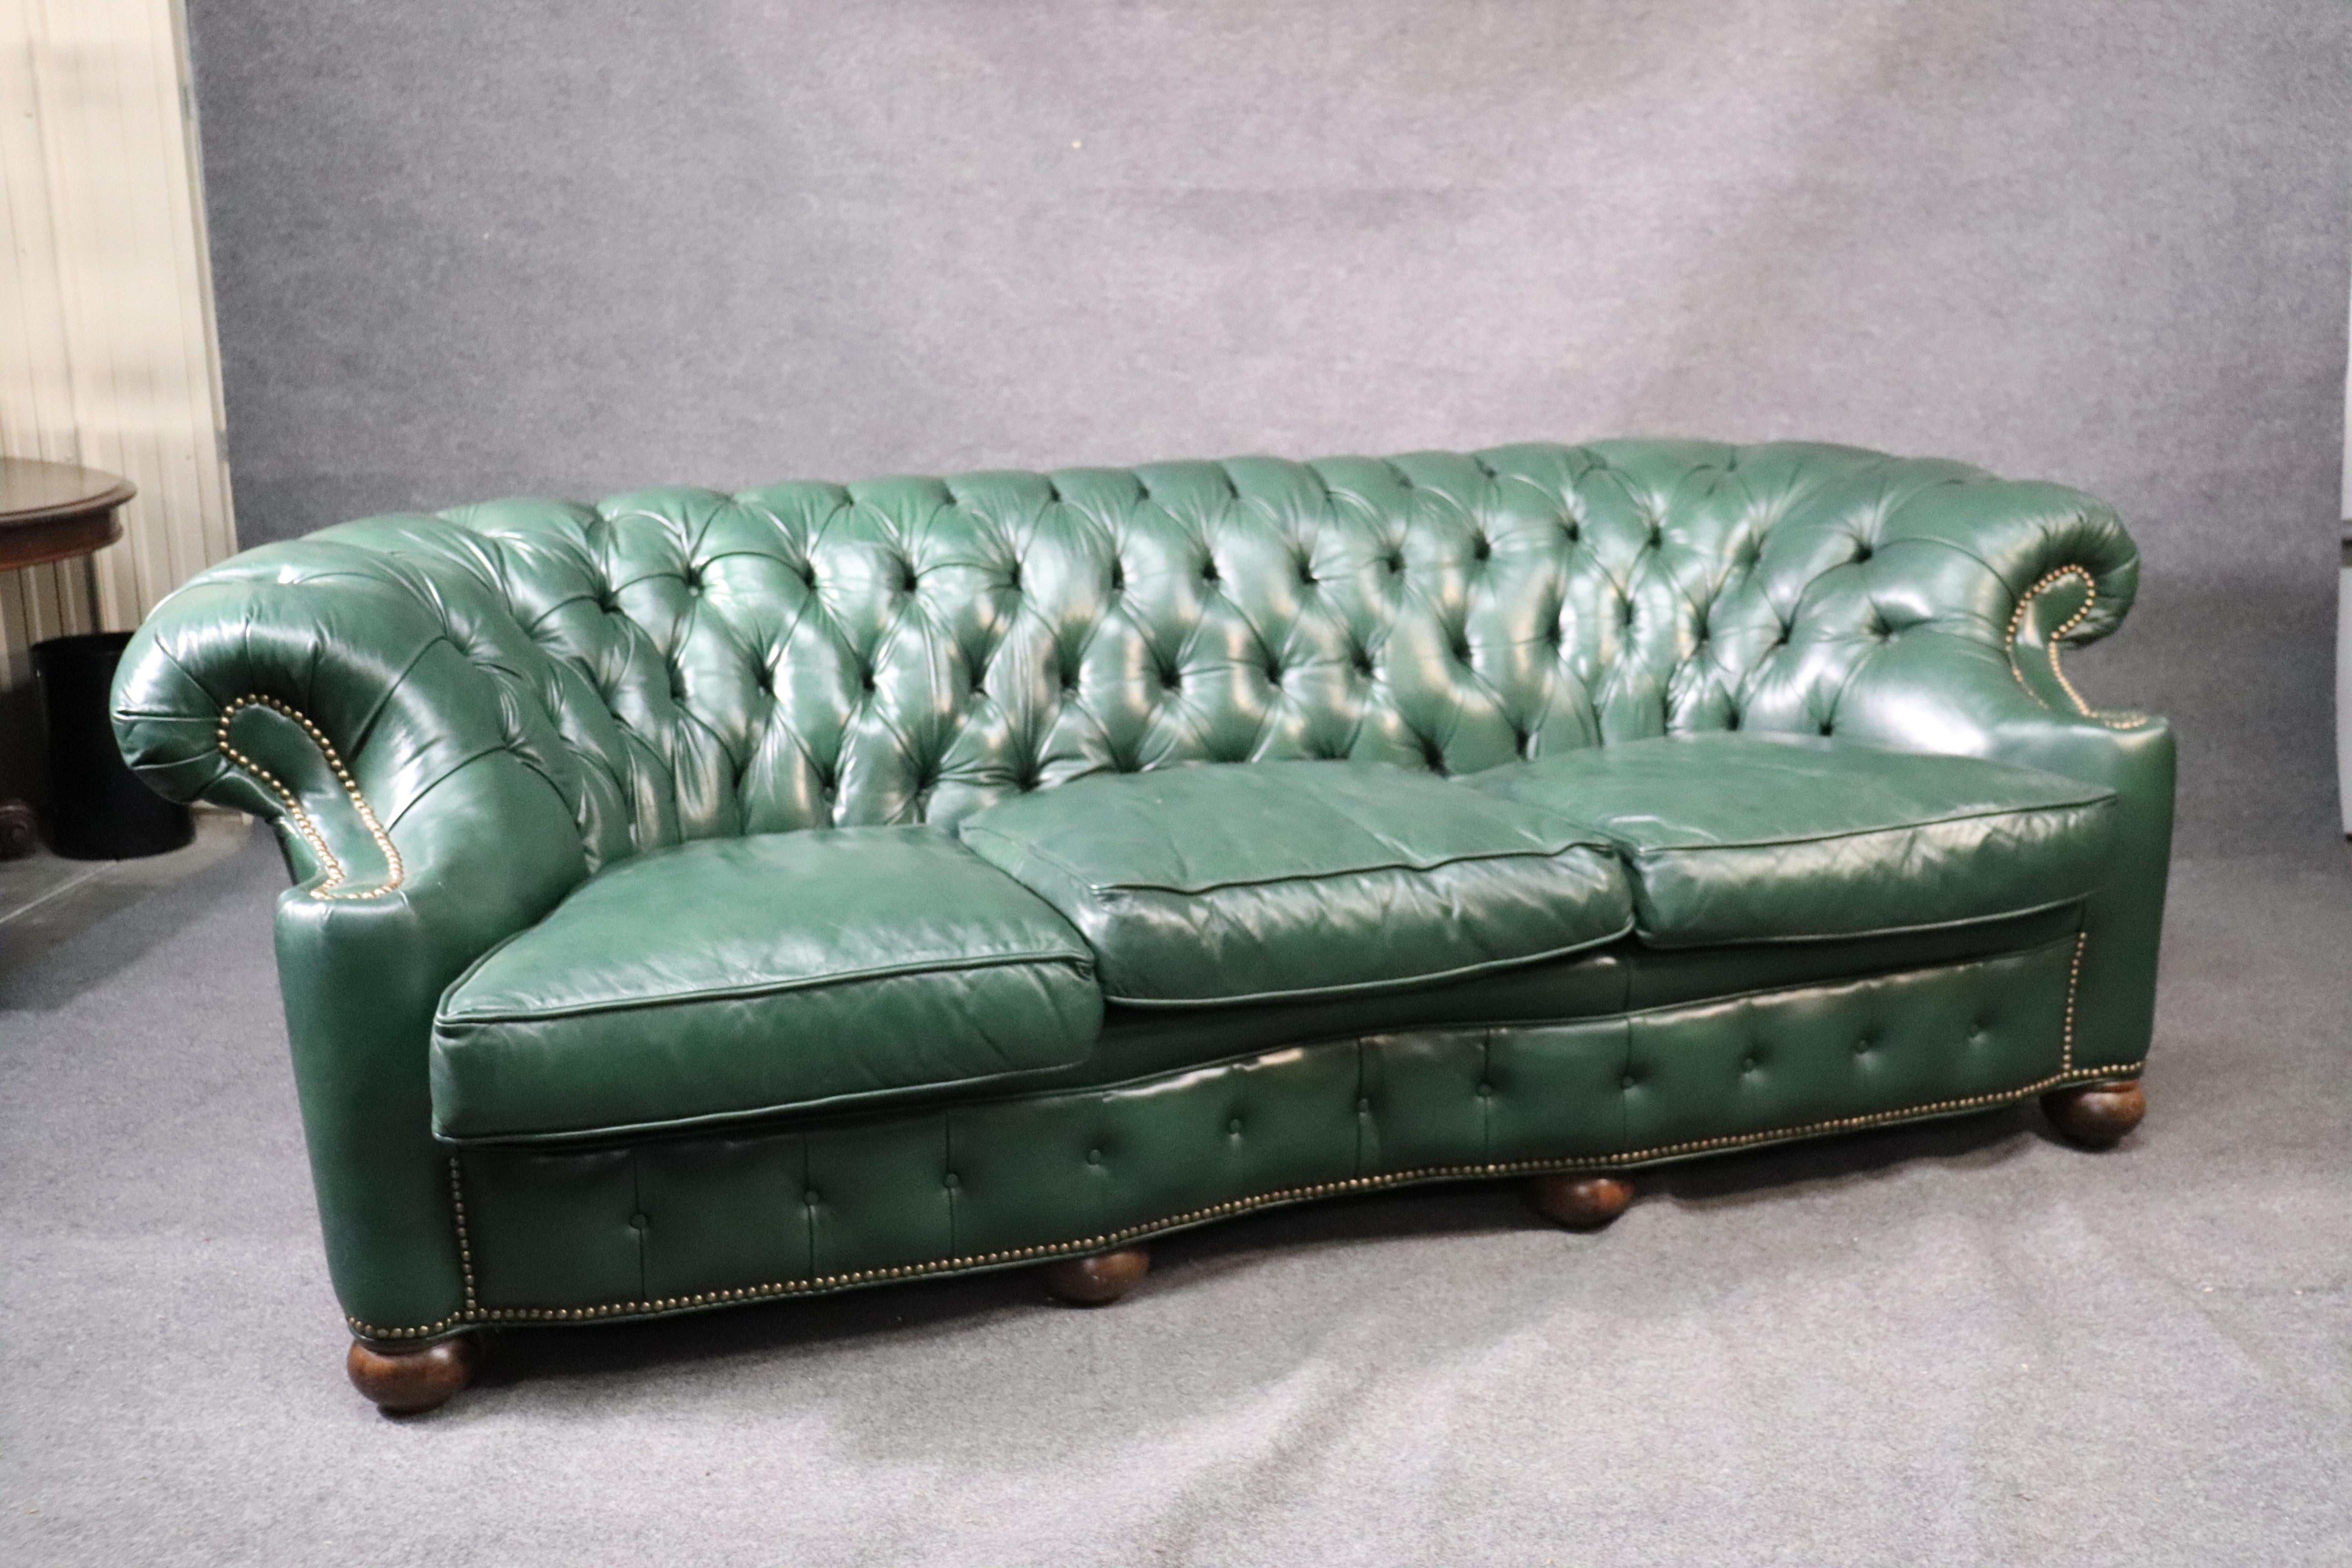 This is a gorgeous Chesterfield sofa made by Old Hickory leather company. The sofa is in very good used condition. The color is gorgeous and despite the way it appears - the cushions fit correctly. Measures: 89 wide x 39 deep x 31 tall and the seat